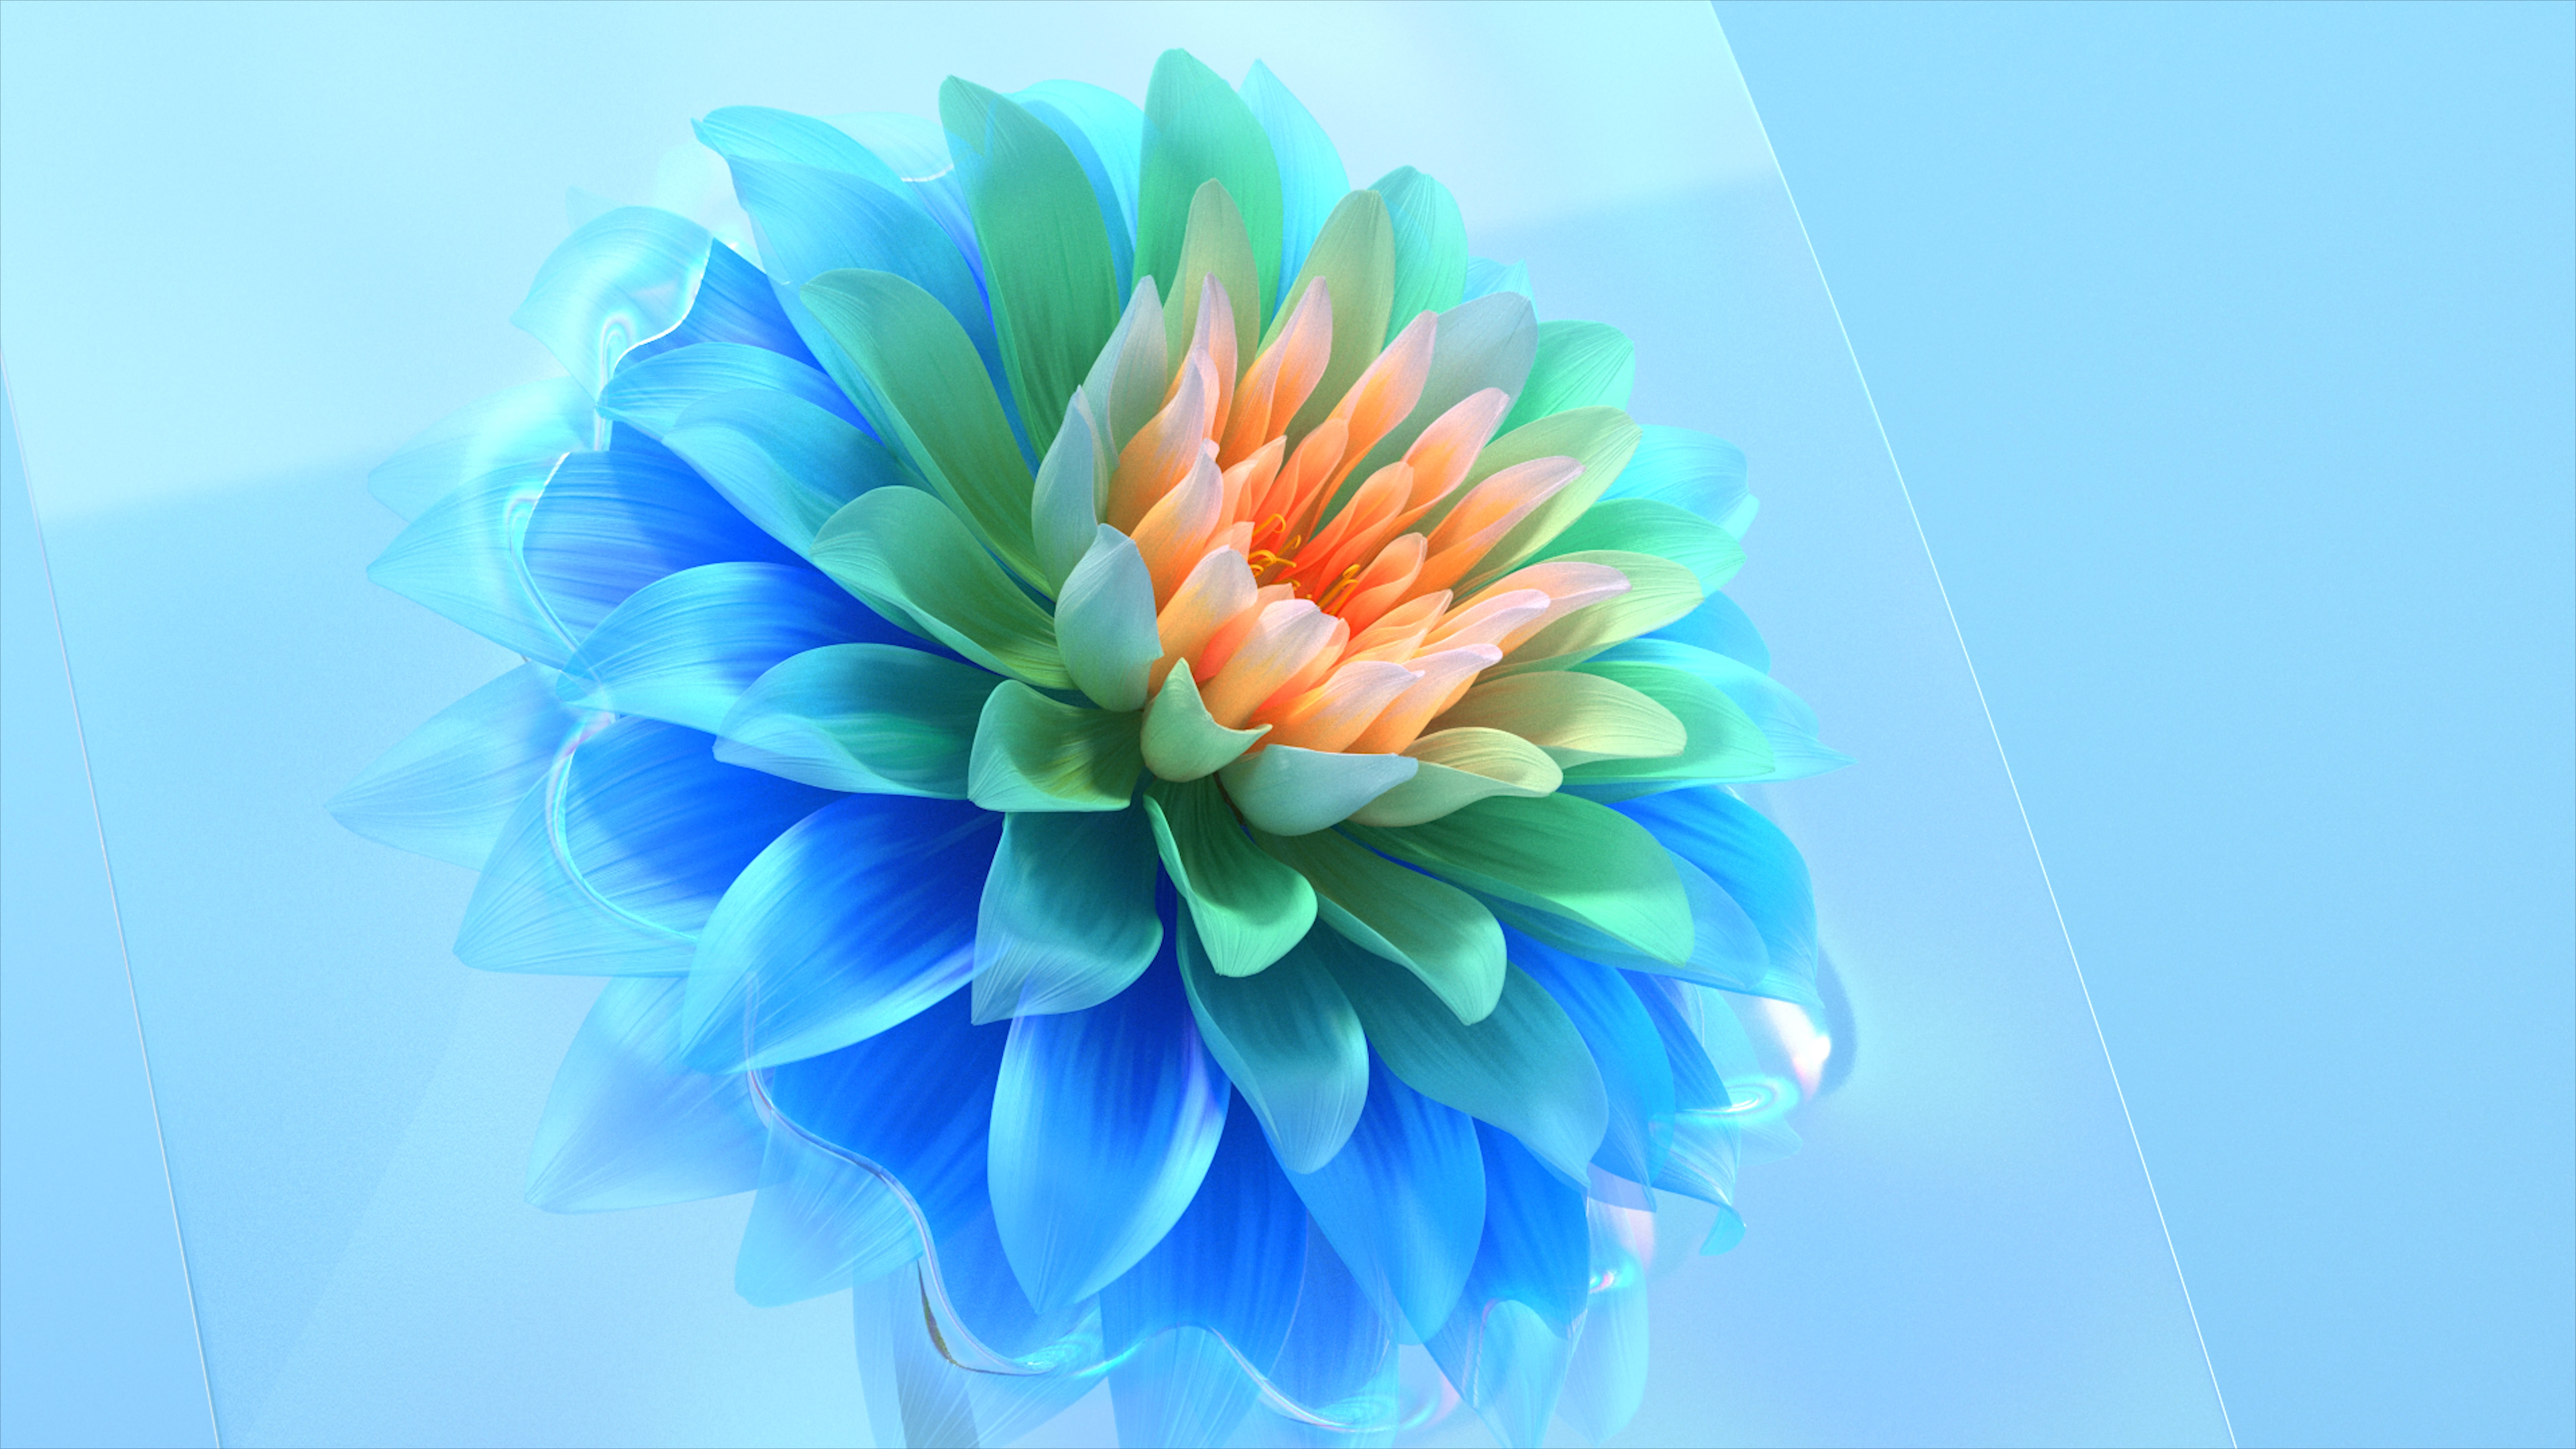 Flowers Abstract 3D Abstract Digital Digital Art Colorful Render Blooming Plants Cyan 3840x2160